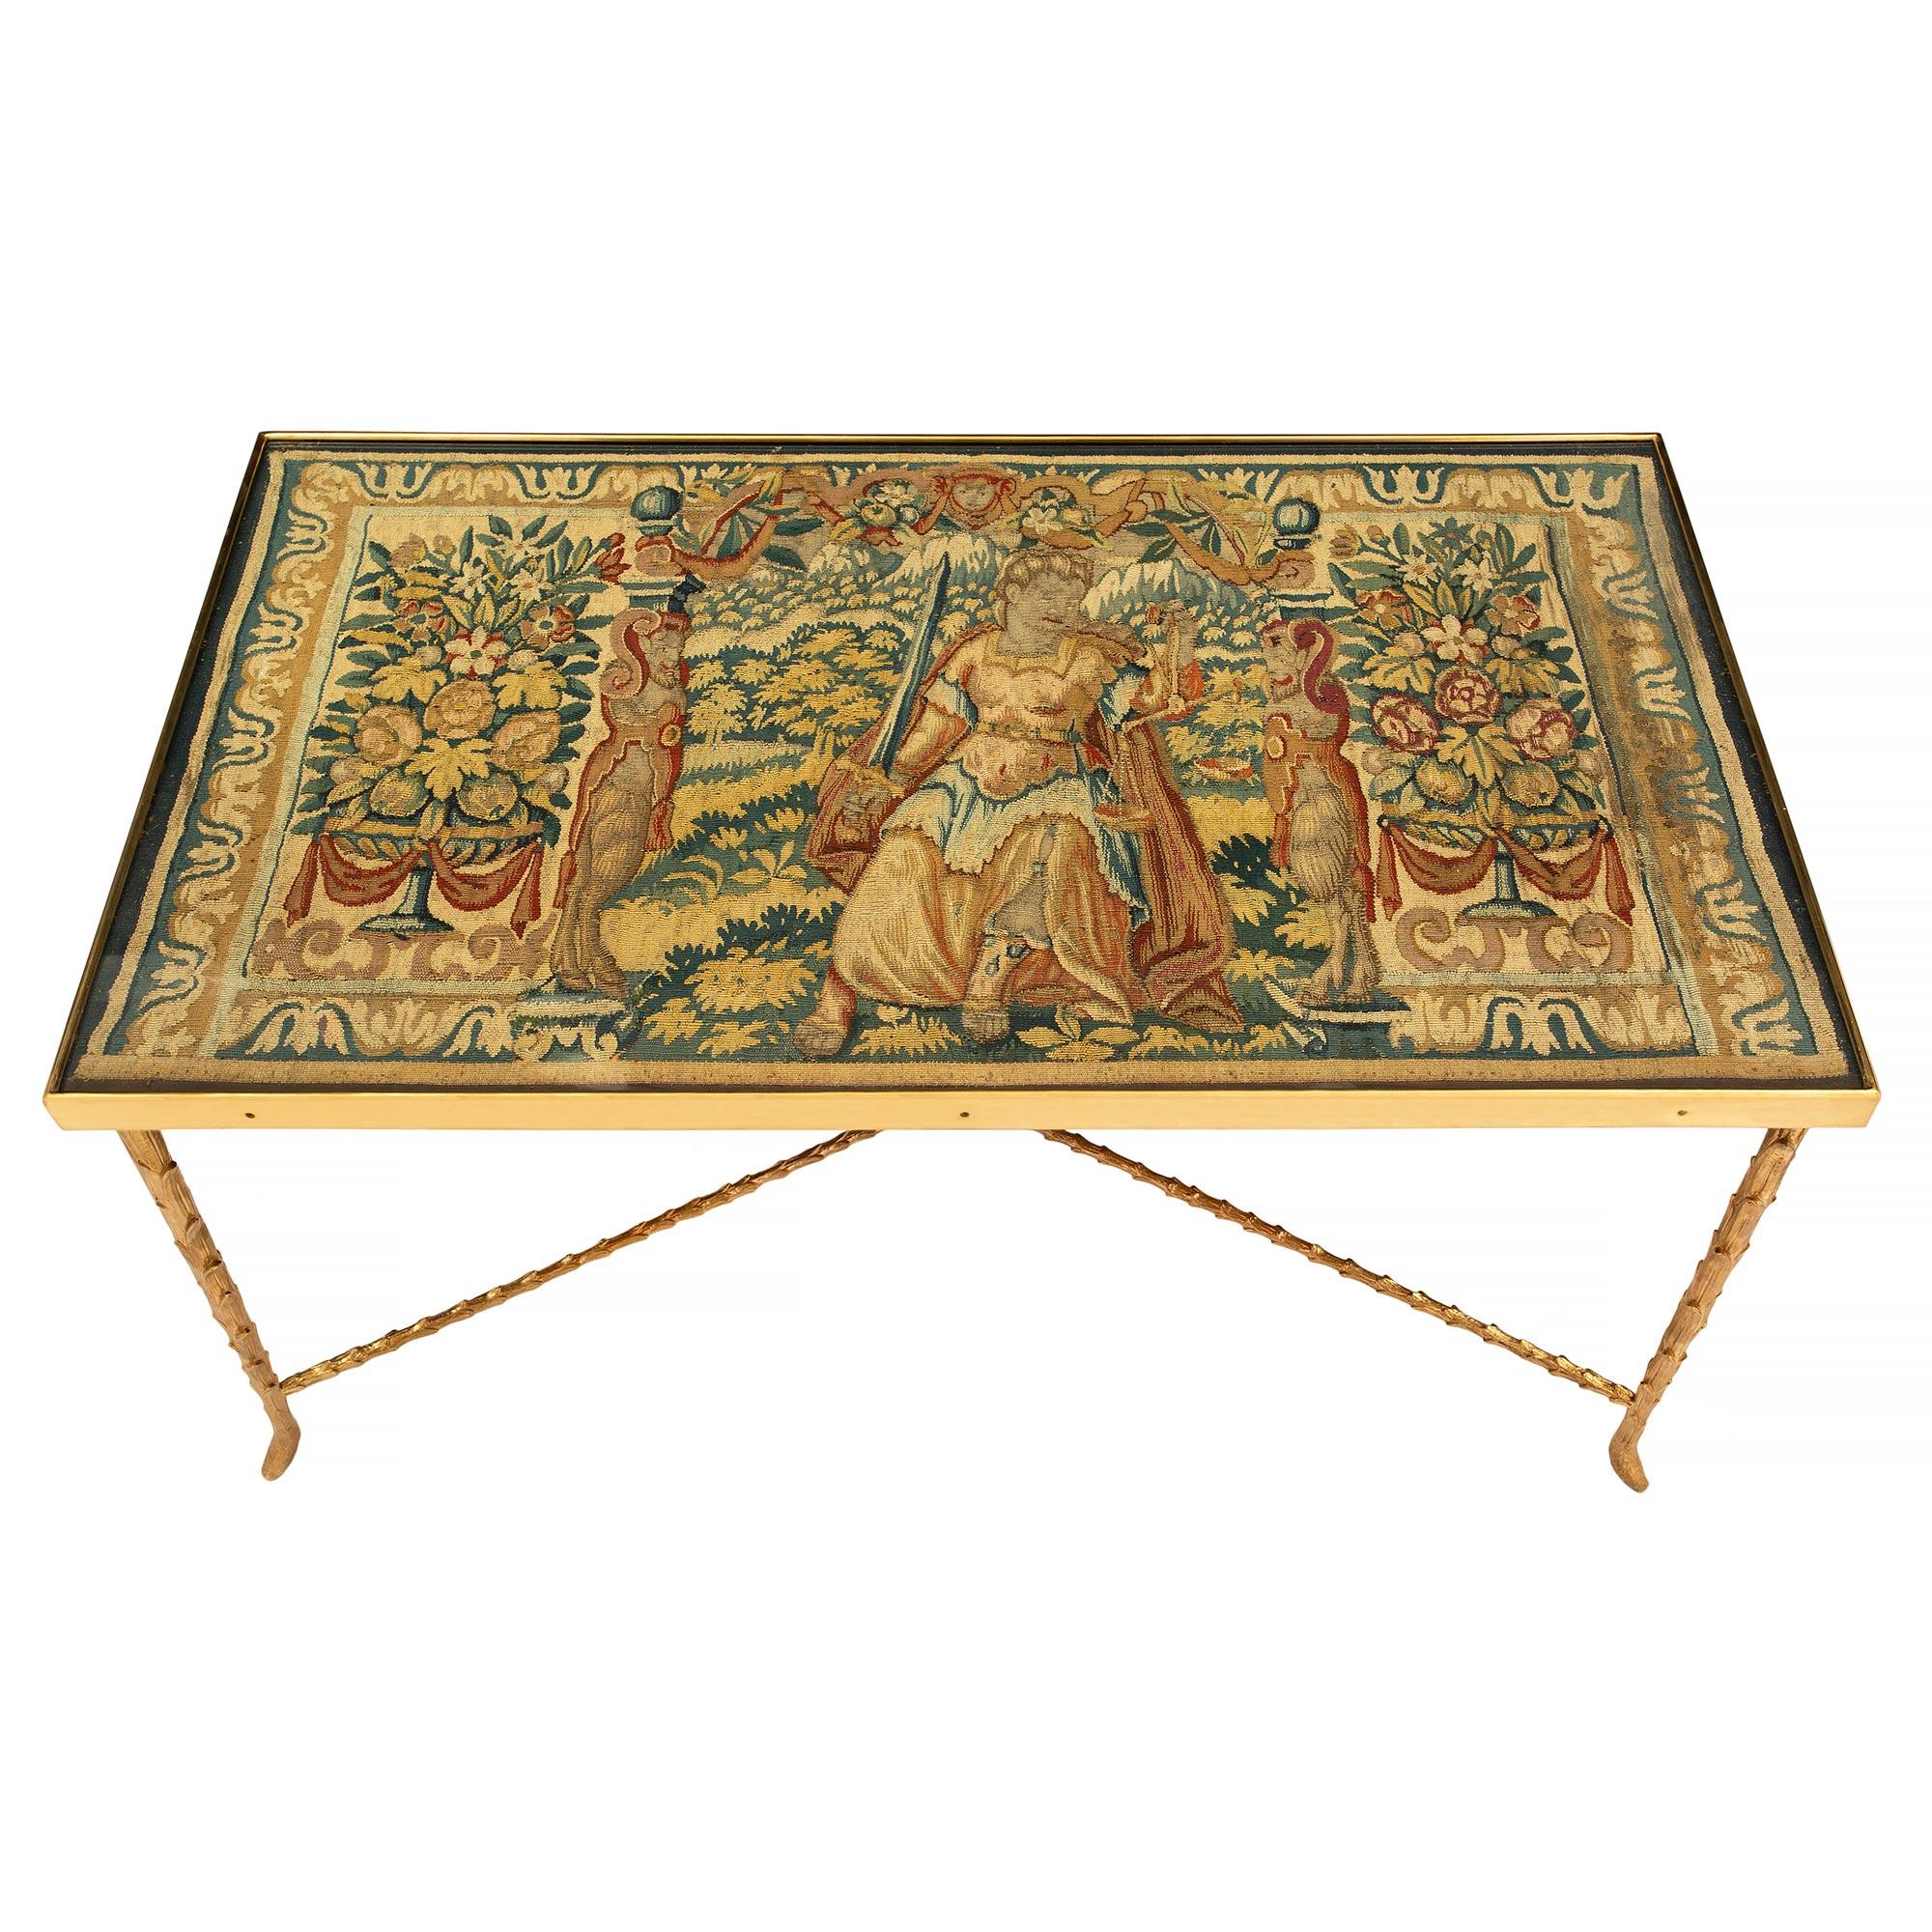 An elegant and wonderfully decorative French Louis XVI style late 19th century ormolu coffee table with an 18th century tapestry fitted top. The rectangular shaped ormolu table is raised by four foliate designed legs. The legs are joined by an 'X'